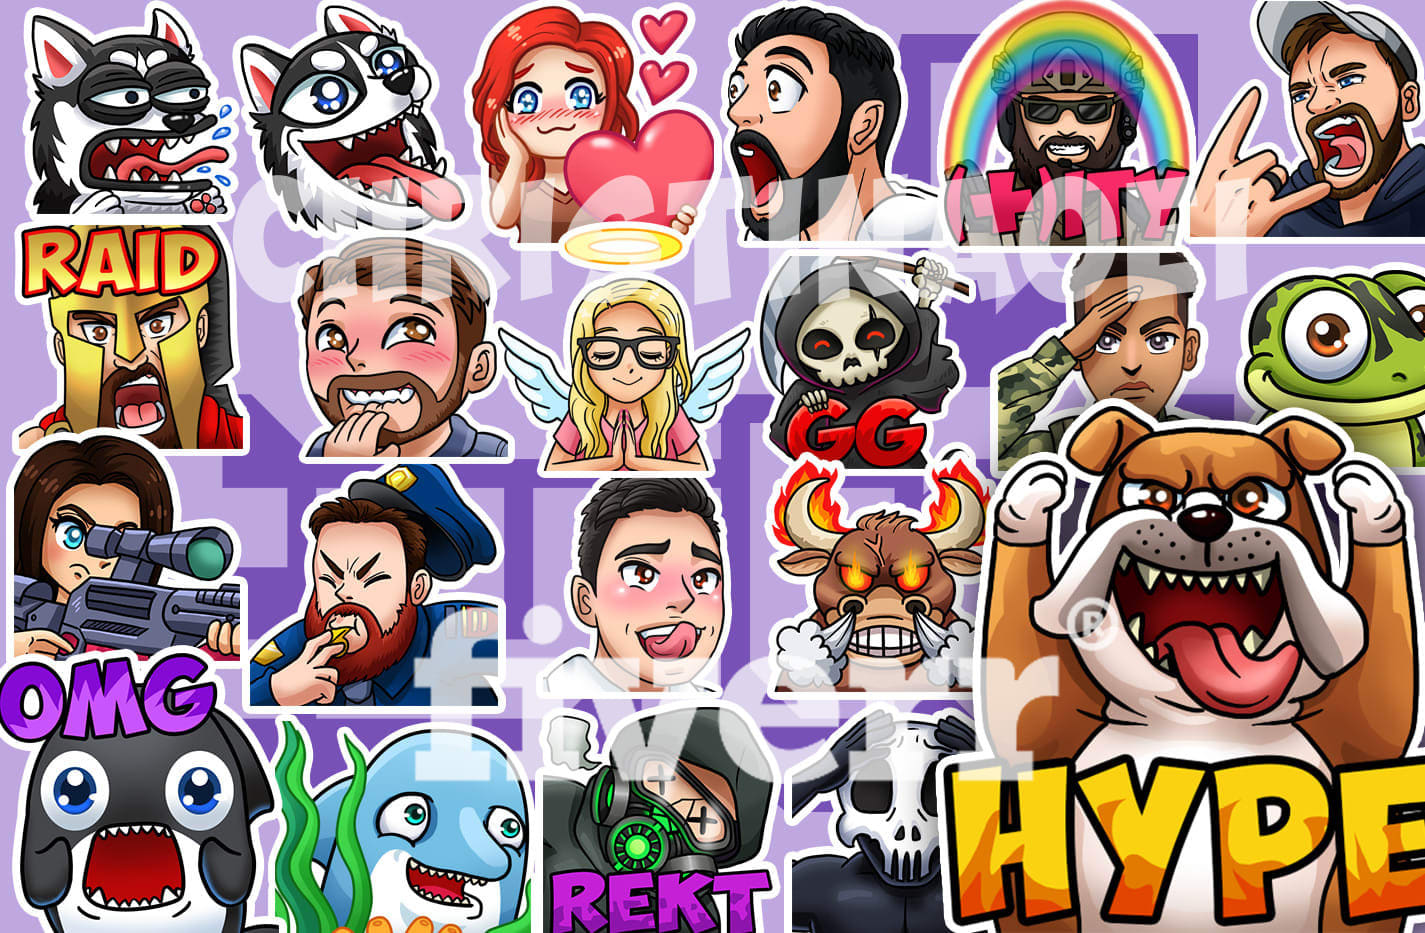 Draw Great Twitch Emotes Or Sub Badges For You By Christinaoei Fiverr